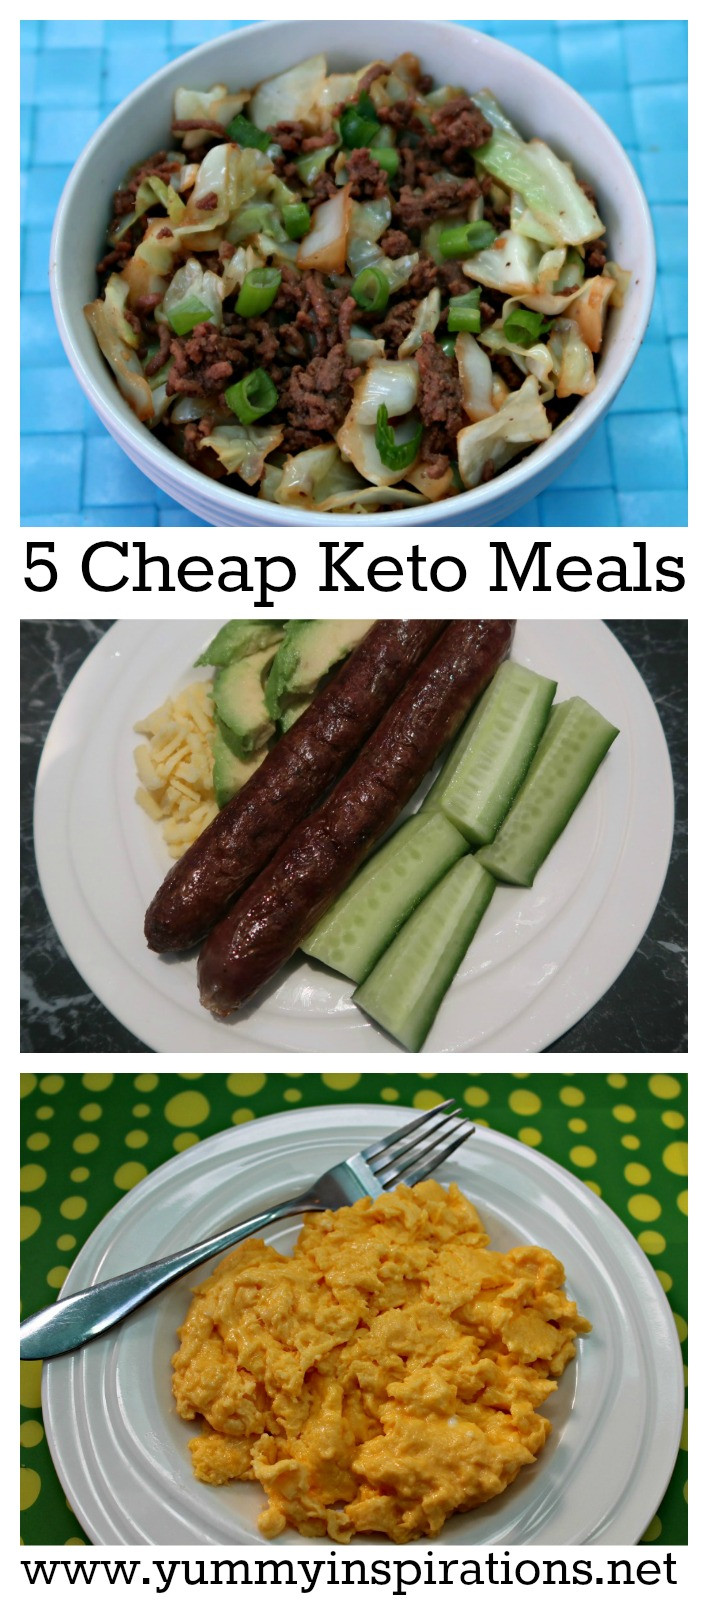 Low Carb Keto Foods
 5 Cheap Keto Meals Low Carb Keto Diet Foods A Bud